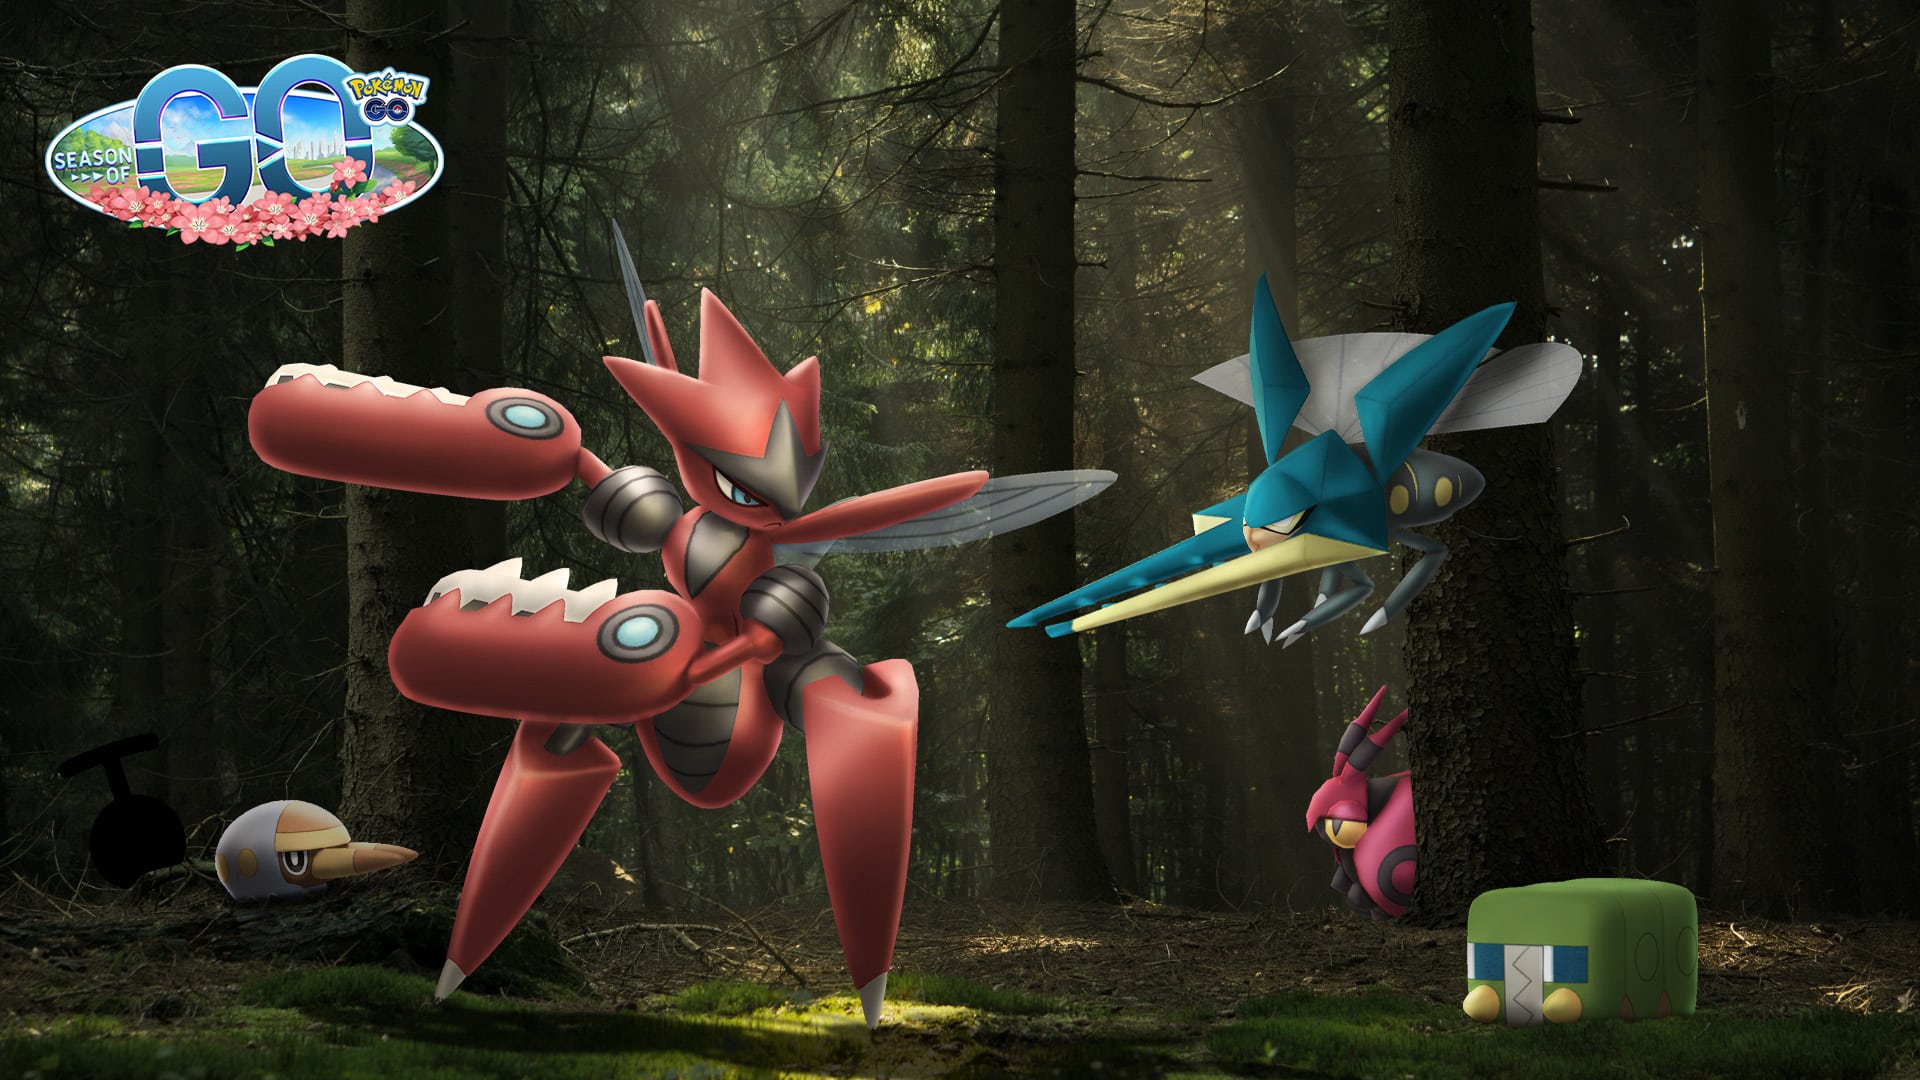 New Raid Attackers: Bug Out and Ultra Beasts (Electric and Bug types)